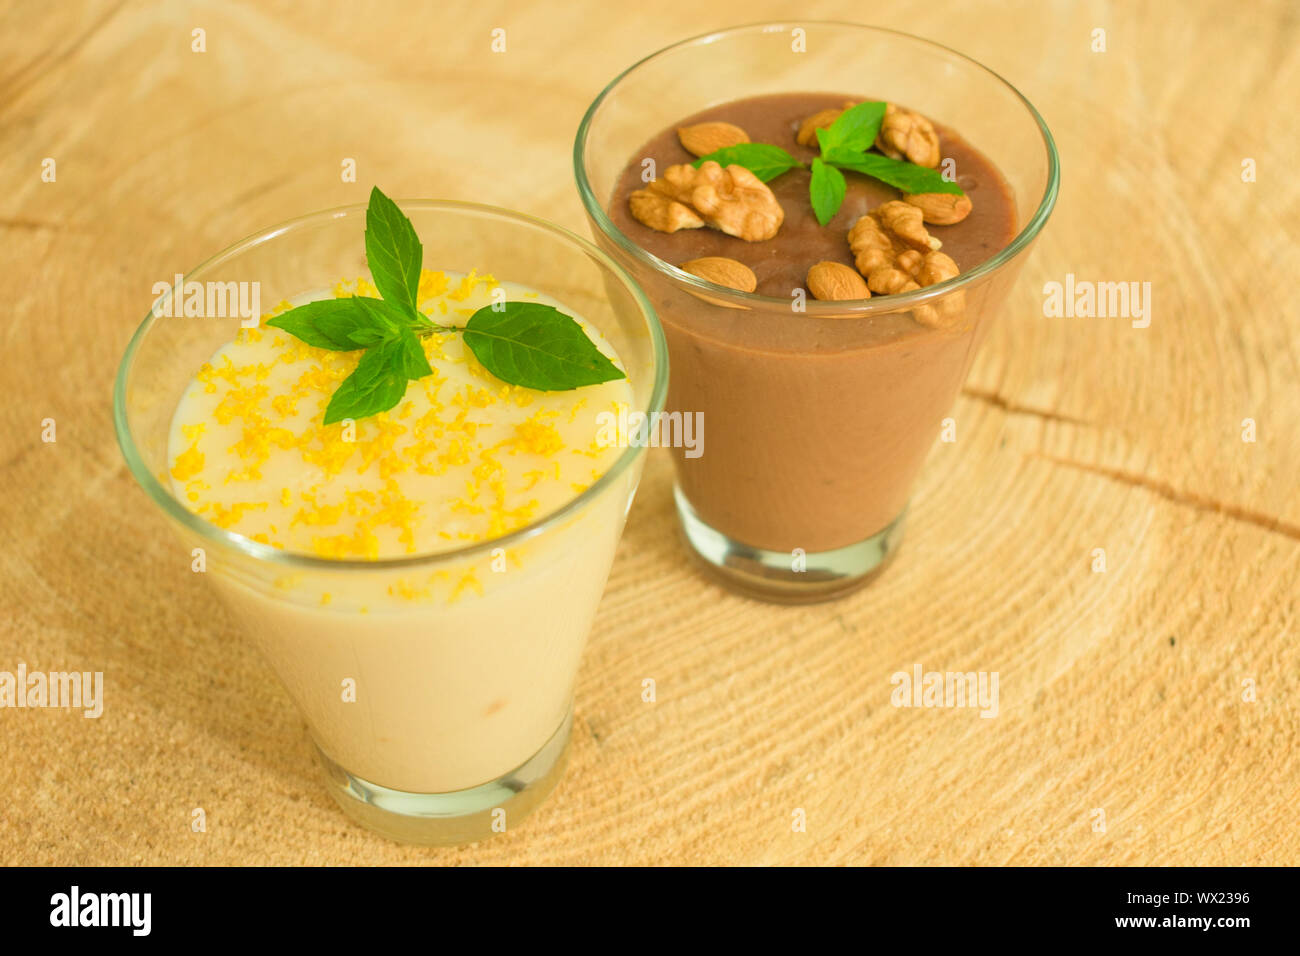 Dessert chocolate pudding with nuts and vanilla pudding with lemon ...